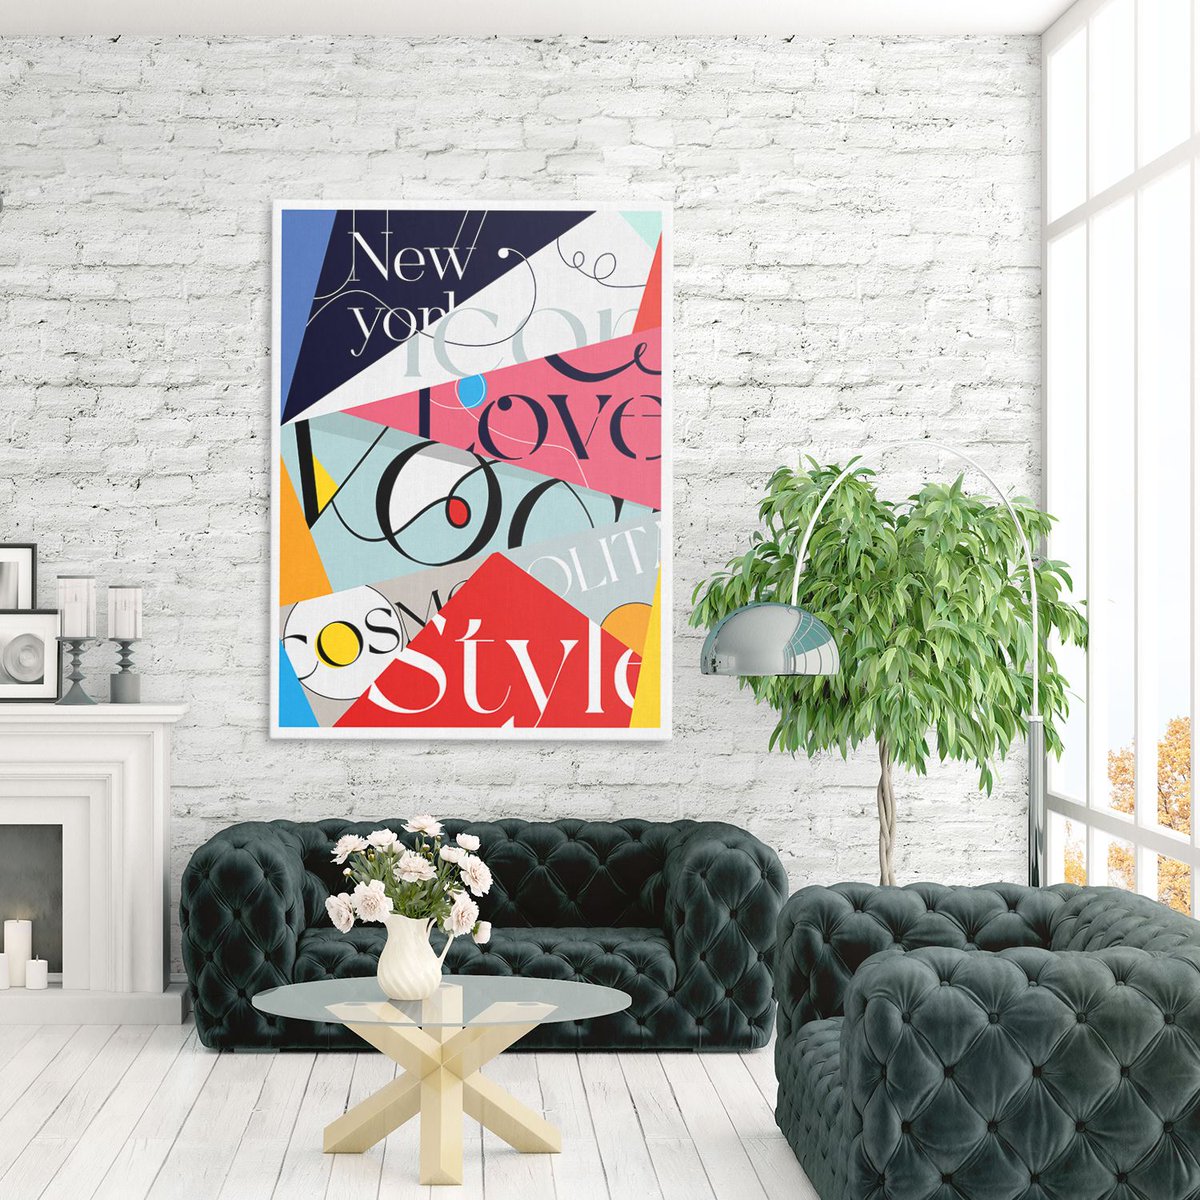 Fashion meets art with this stylish typography canvas for home decor. 
.
.
#fashionart #typography #canvasart #homedecor #art #artist #artwork #modernart #contemporaryart #popartdecor #popart #popartist #posterdesign #design #visualart #graphicdesign #collageart #canvaspainting